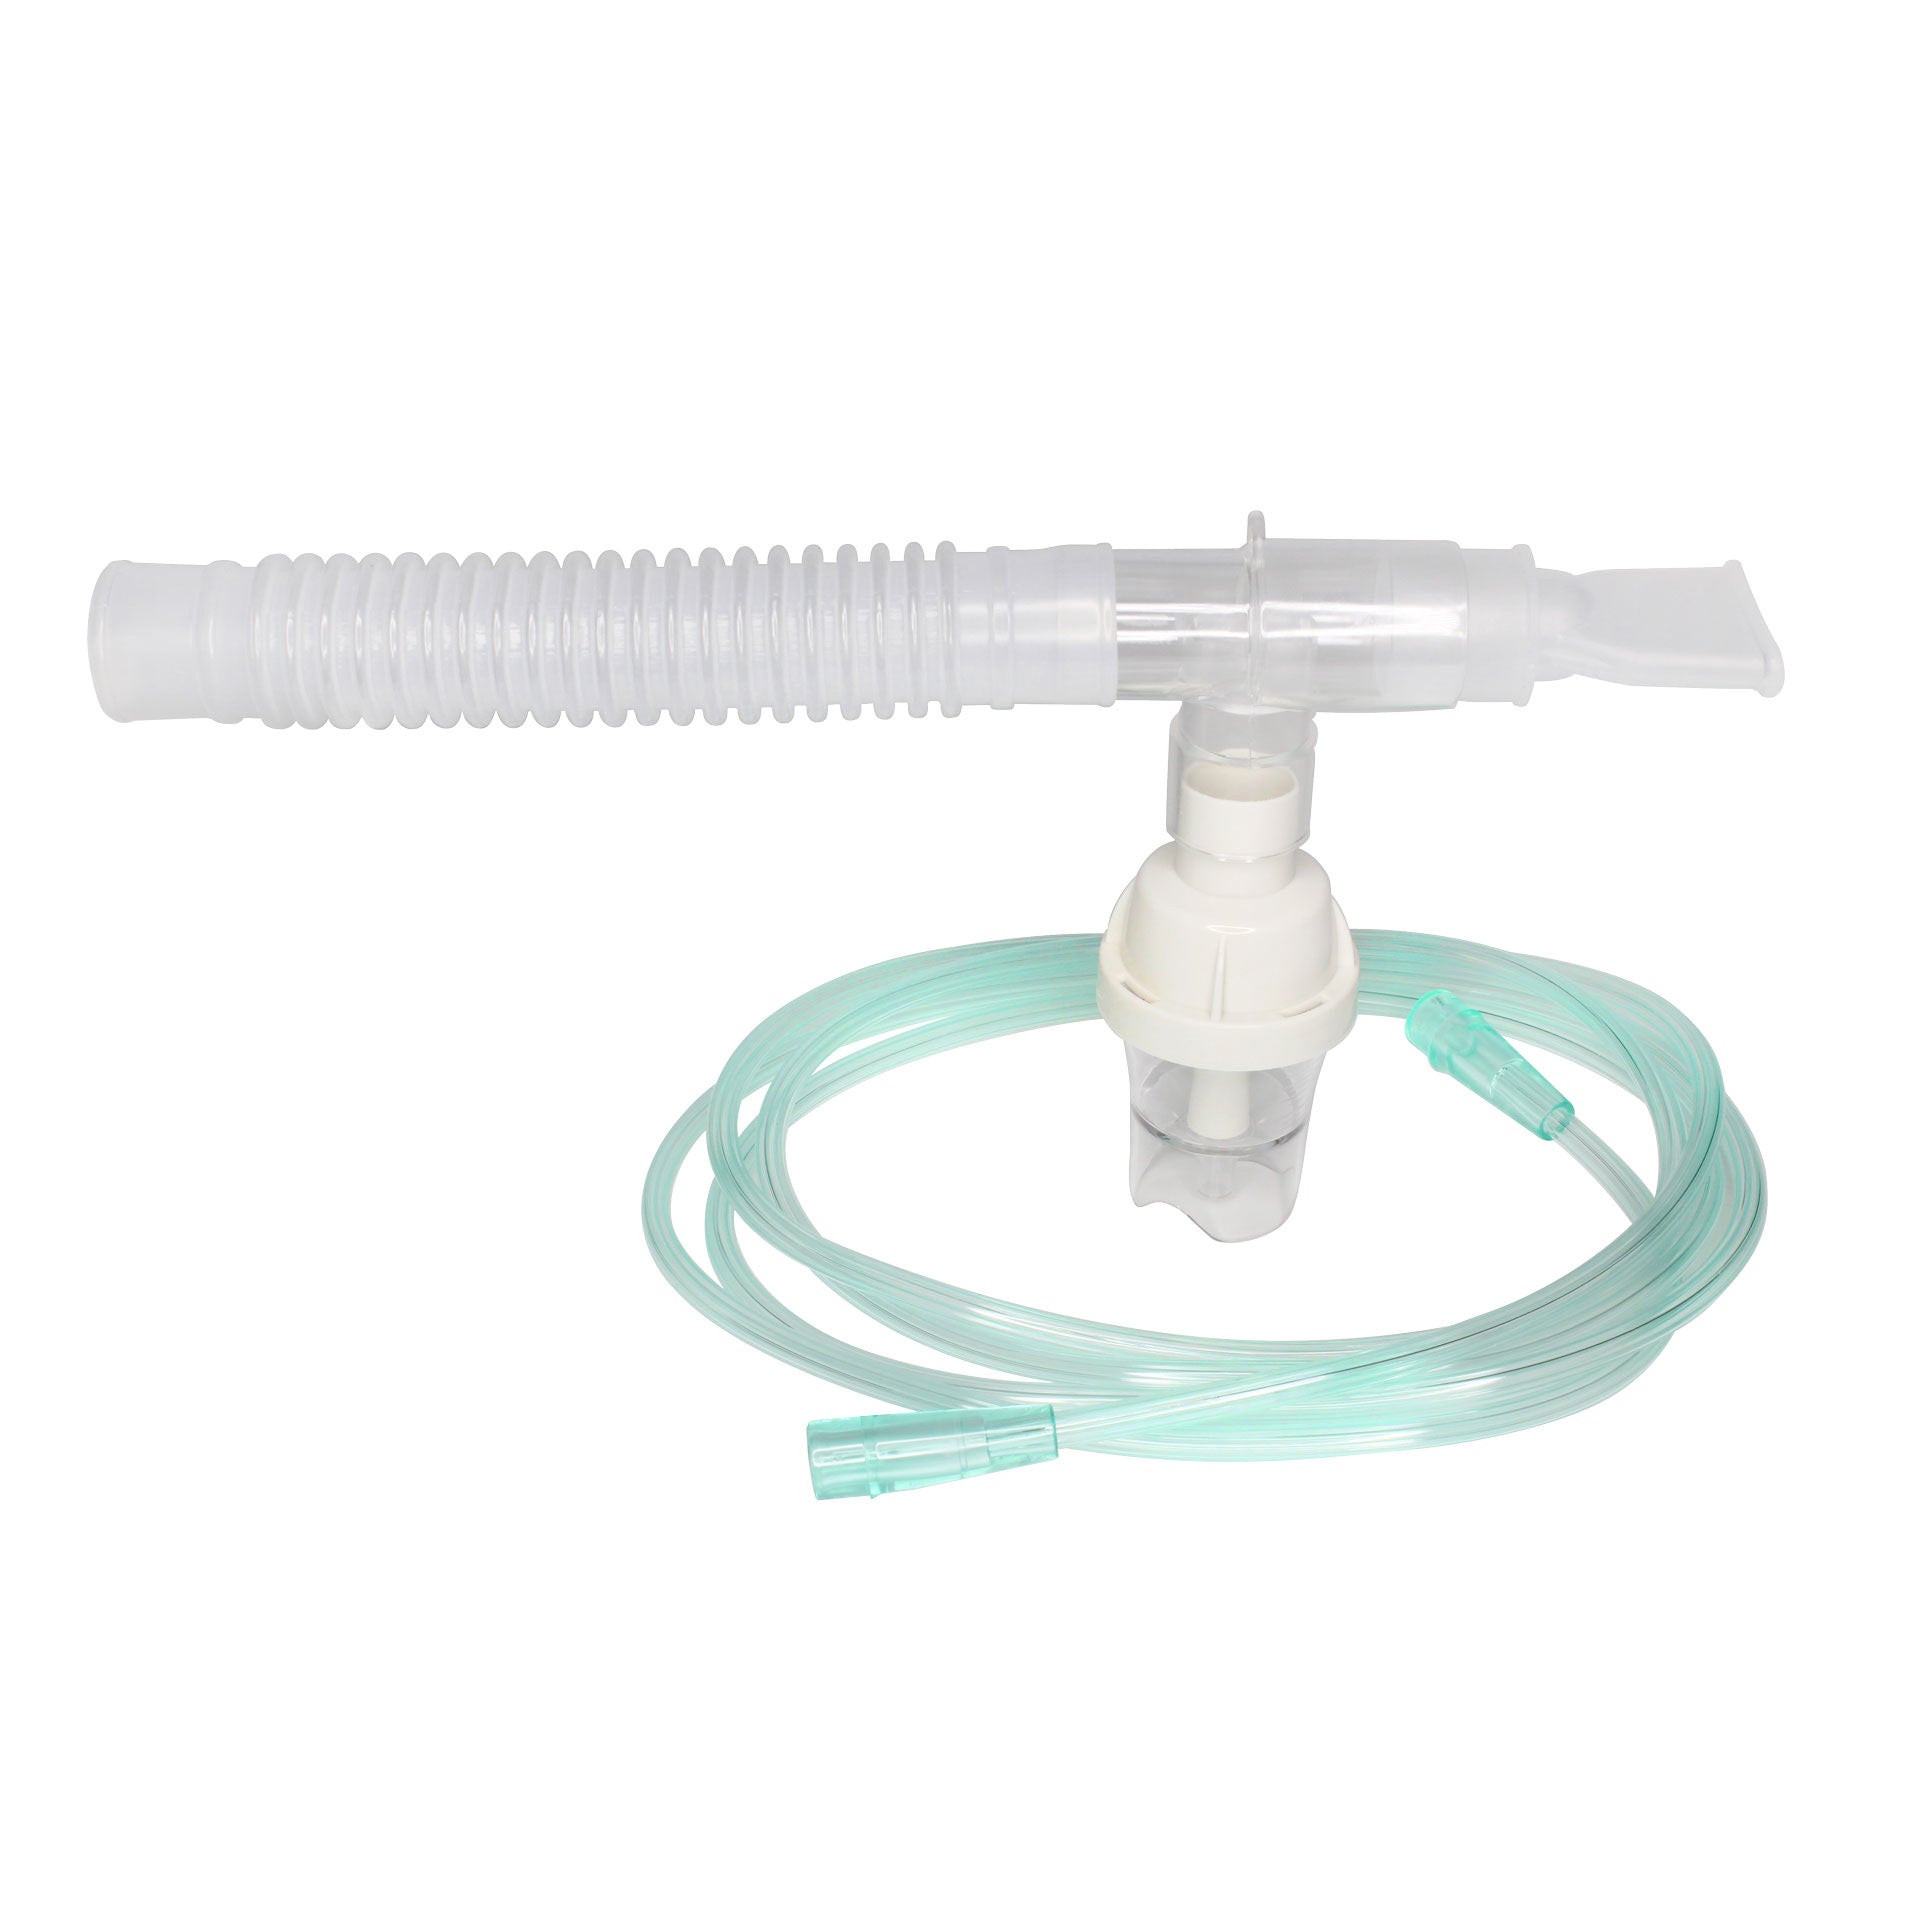 Sunset Reusable Nebulizer Kit with T-Piece